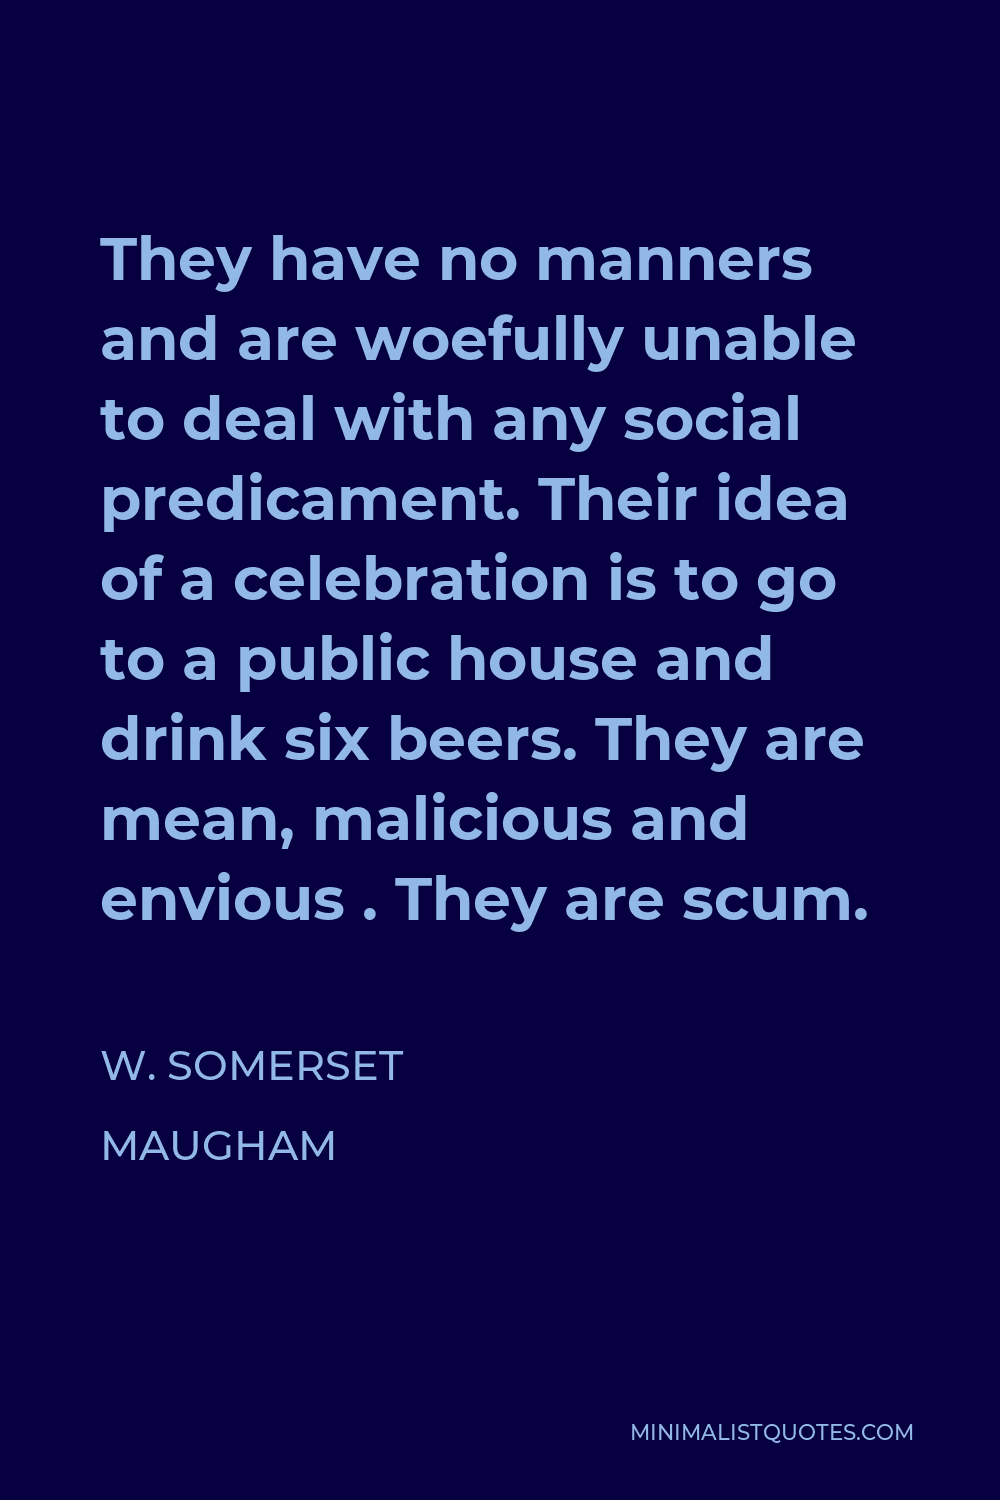 W. Somerset Maugham Quote - They have no manners and are woefully unable to deal with any social predicament. Their idea of a celebration is to go to a public house and drink six beers. They are mean, malicious and envious . They are scum.